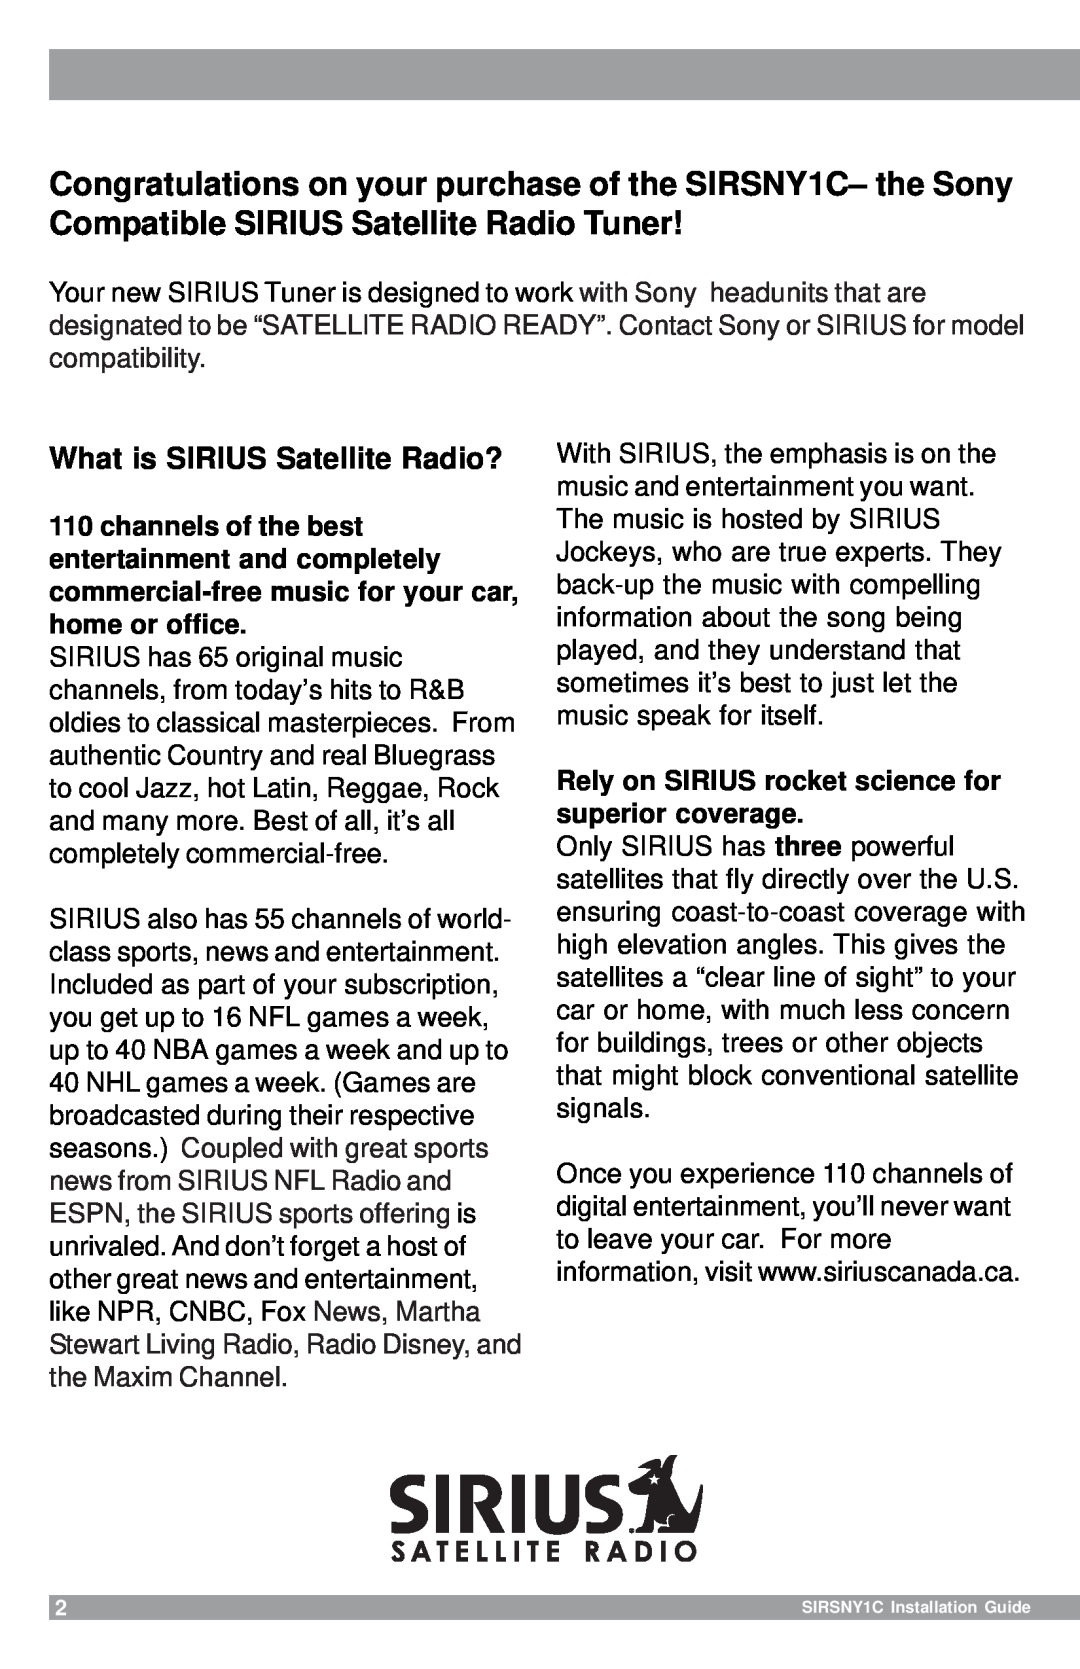 Sirius Satellite Radio SIRSNY1C manual Rely on SIRIUS rocket science for superior coverage, What is SIRIUS Satellite Radio? 